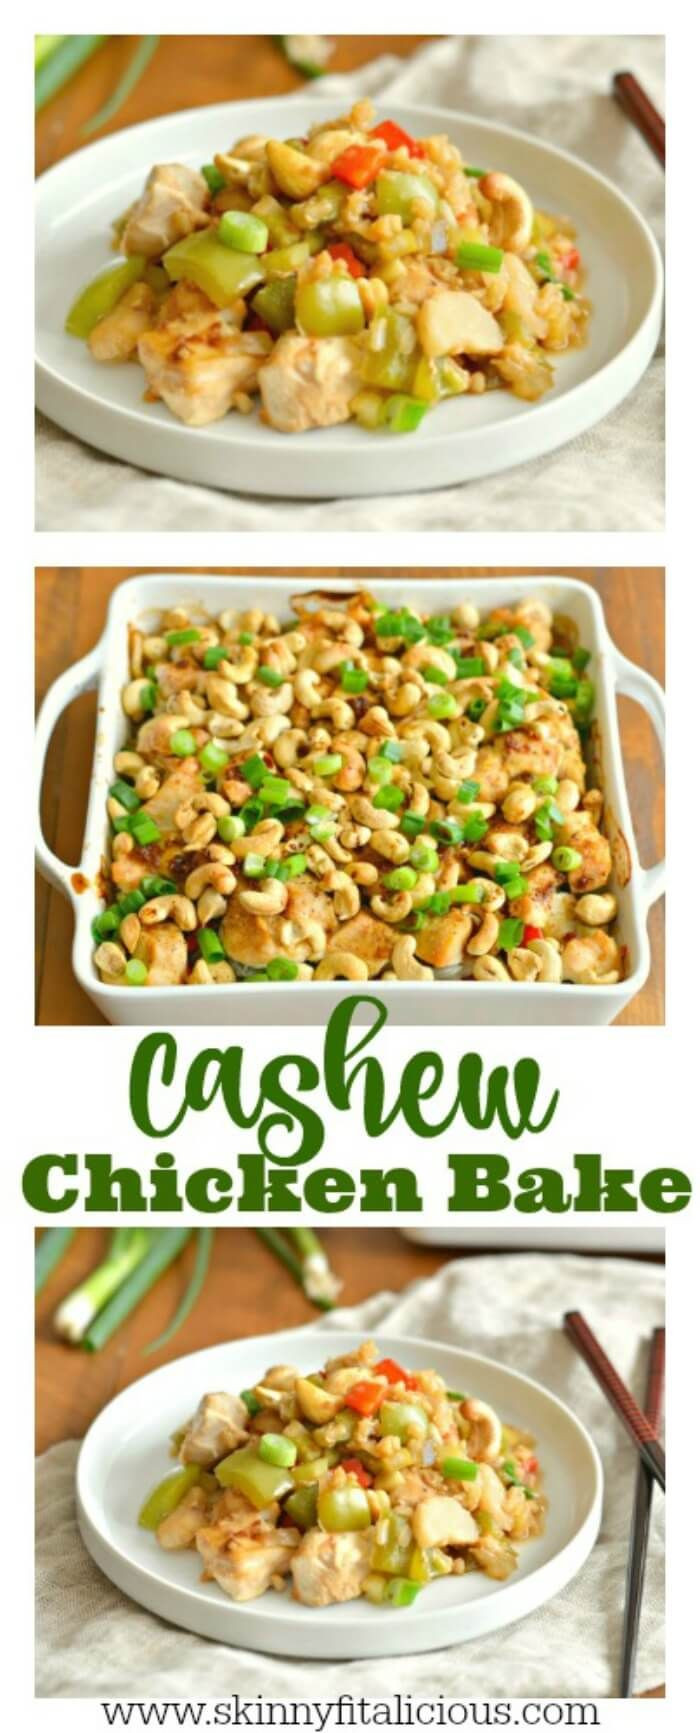 Low Calorie Healthy Dinners
 100 Low Calorie Recipes on Pinterest